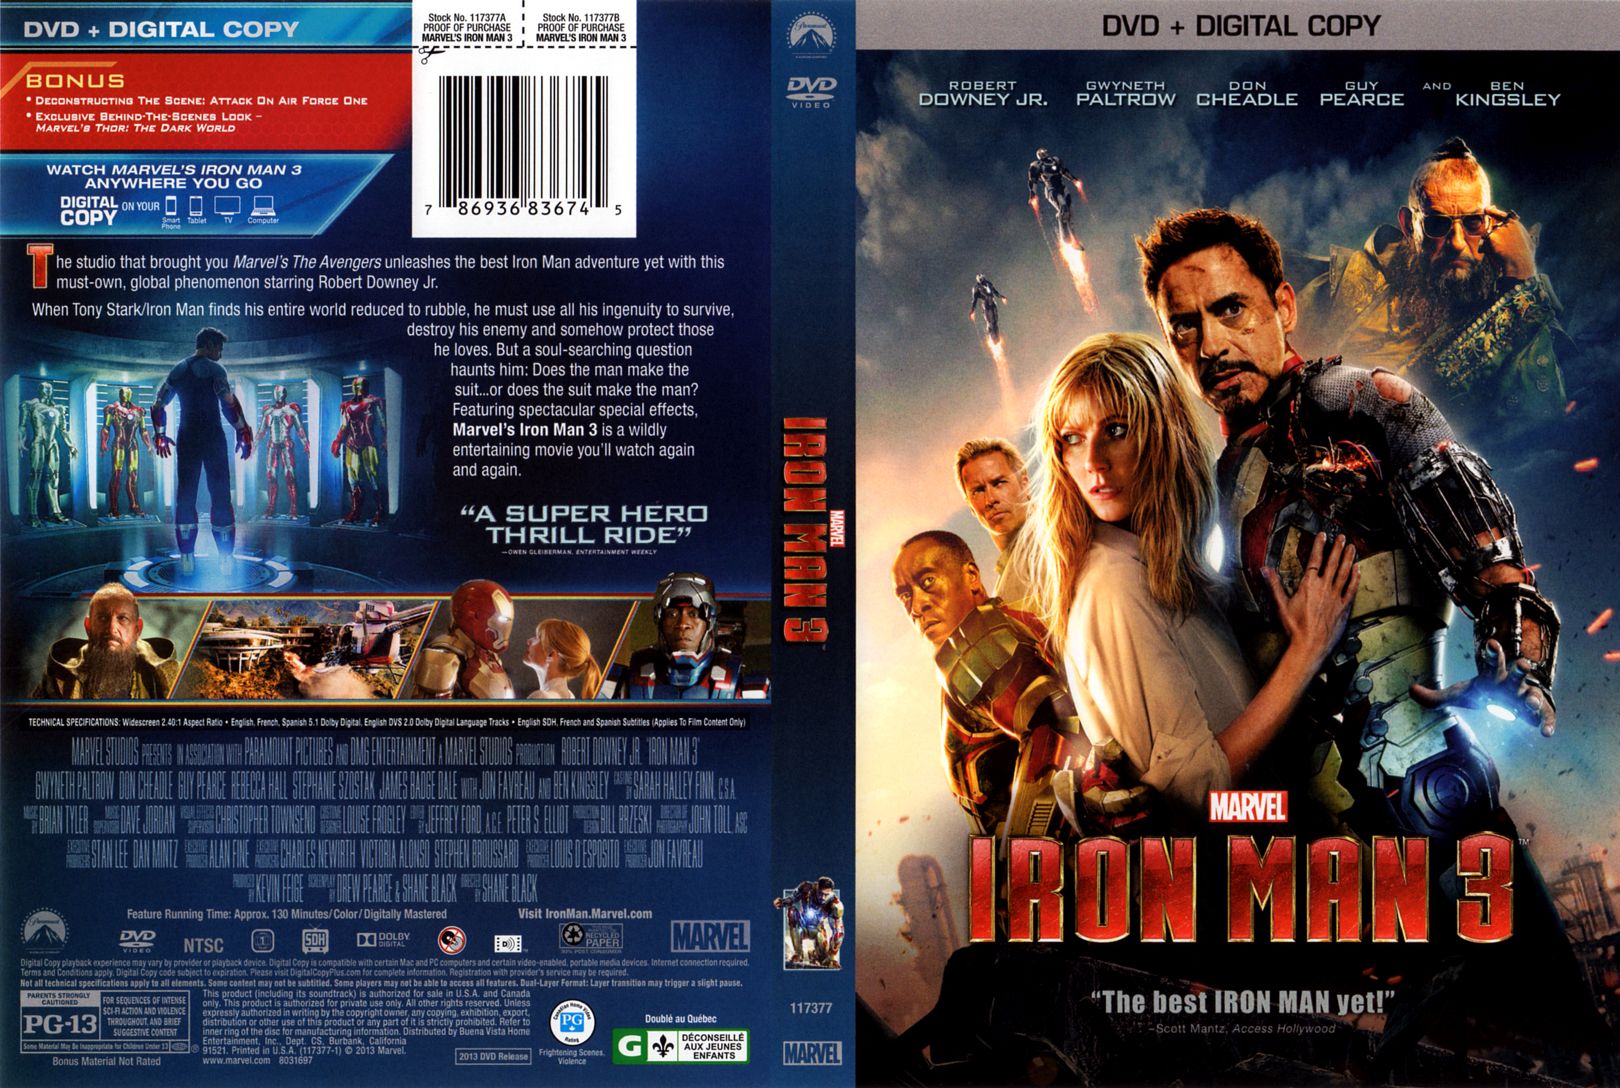 Iron Man 3 front DVD Covers Cover Century Over 1.000.000 Album Art covers f...